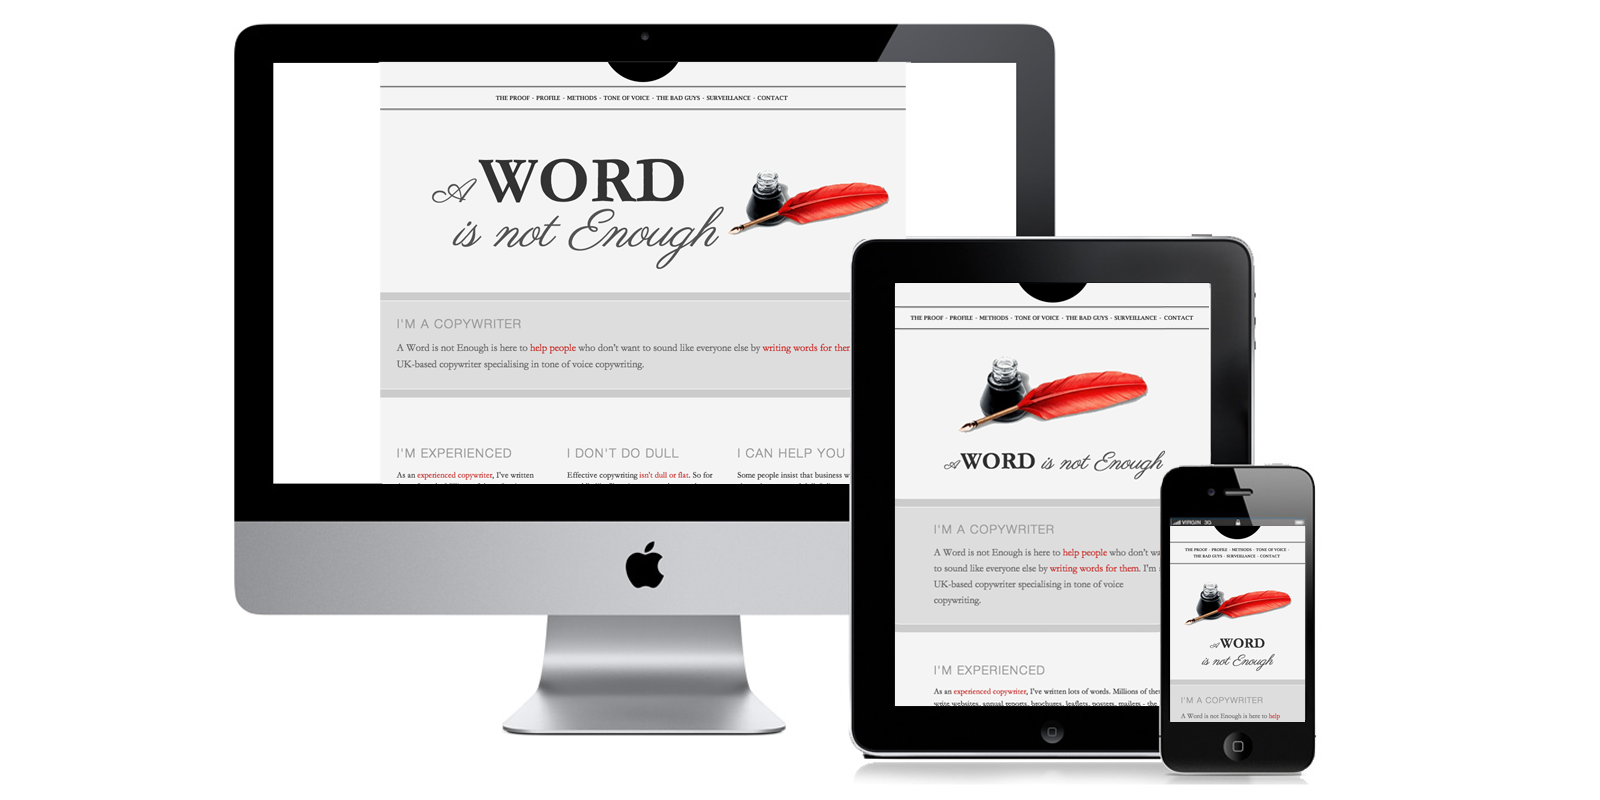 Web redesign template for A Word is not Enough website.